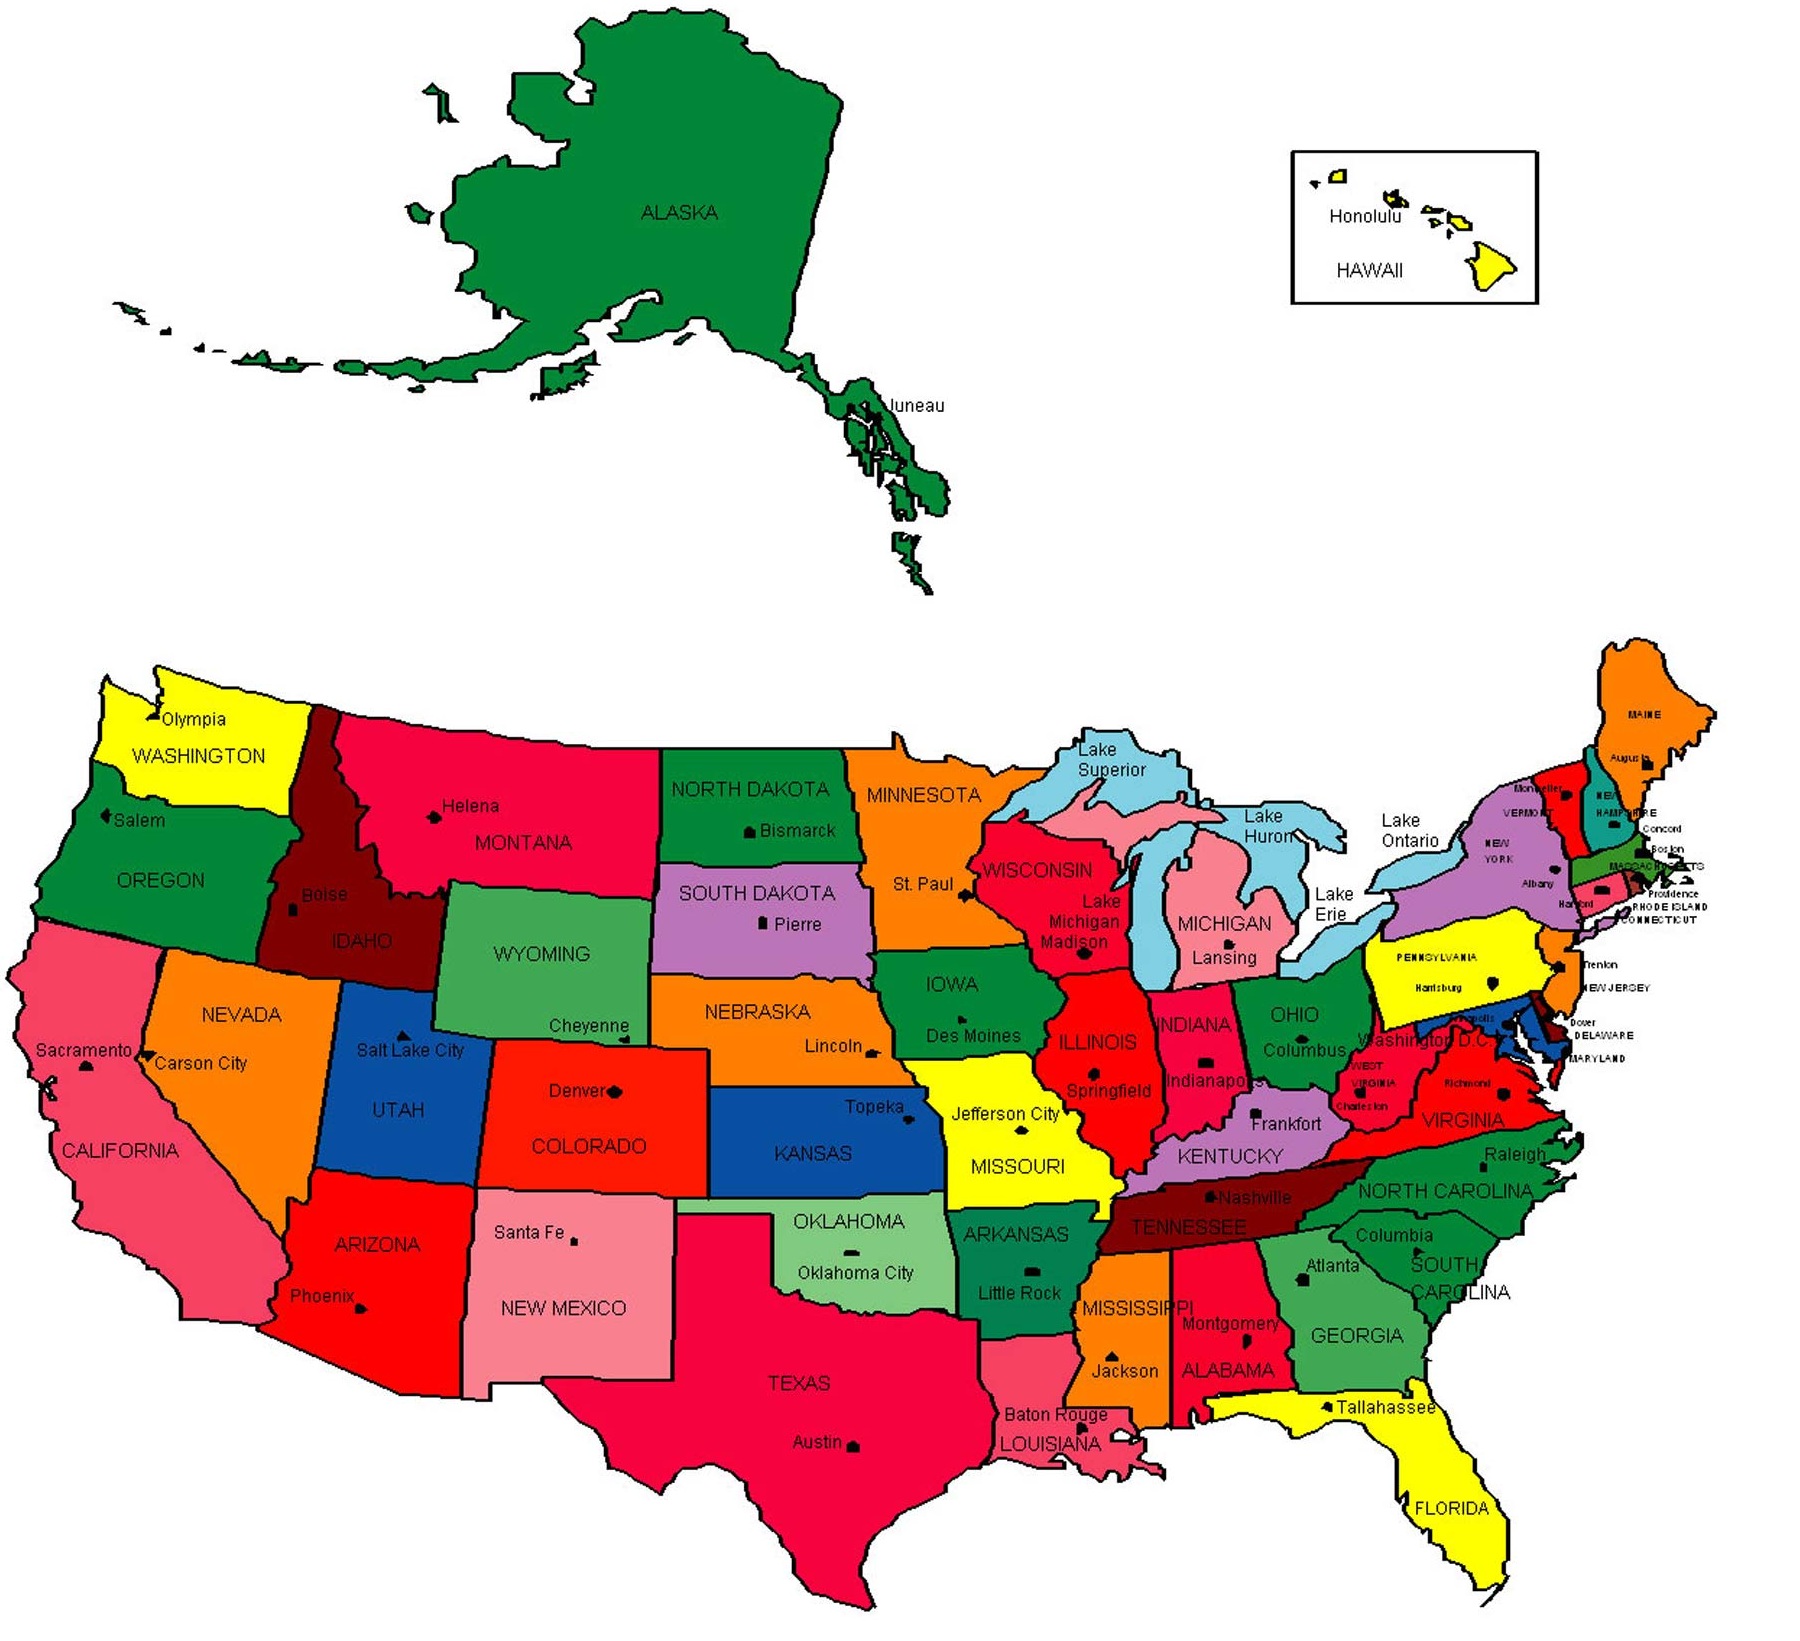 Detailed Map Of Usa States And Cities - www ...